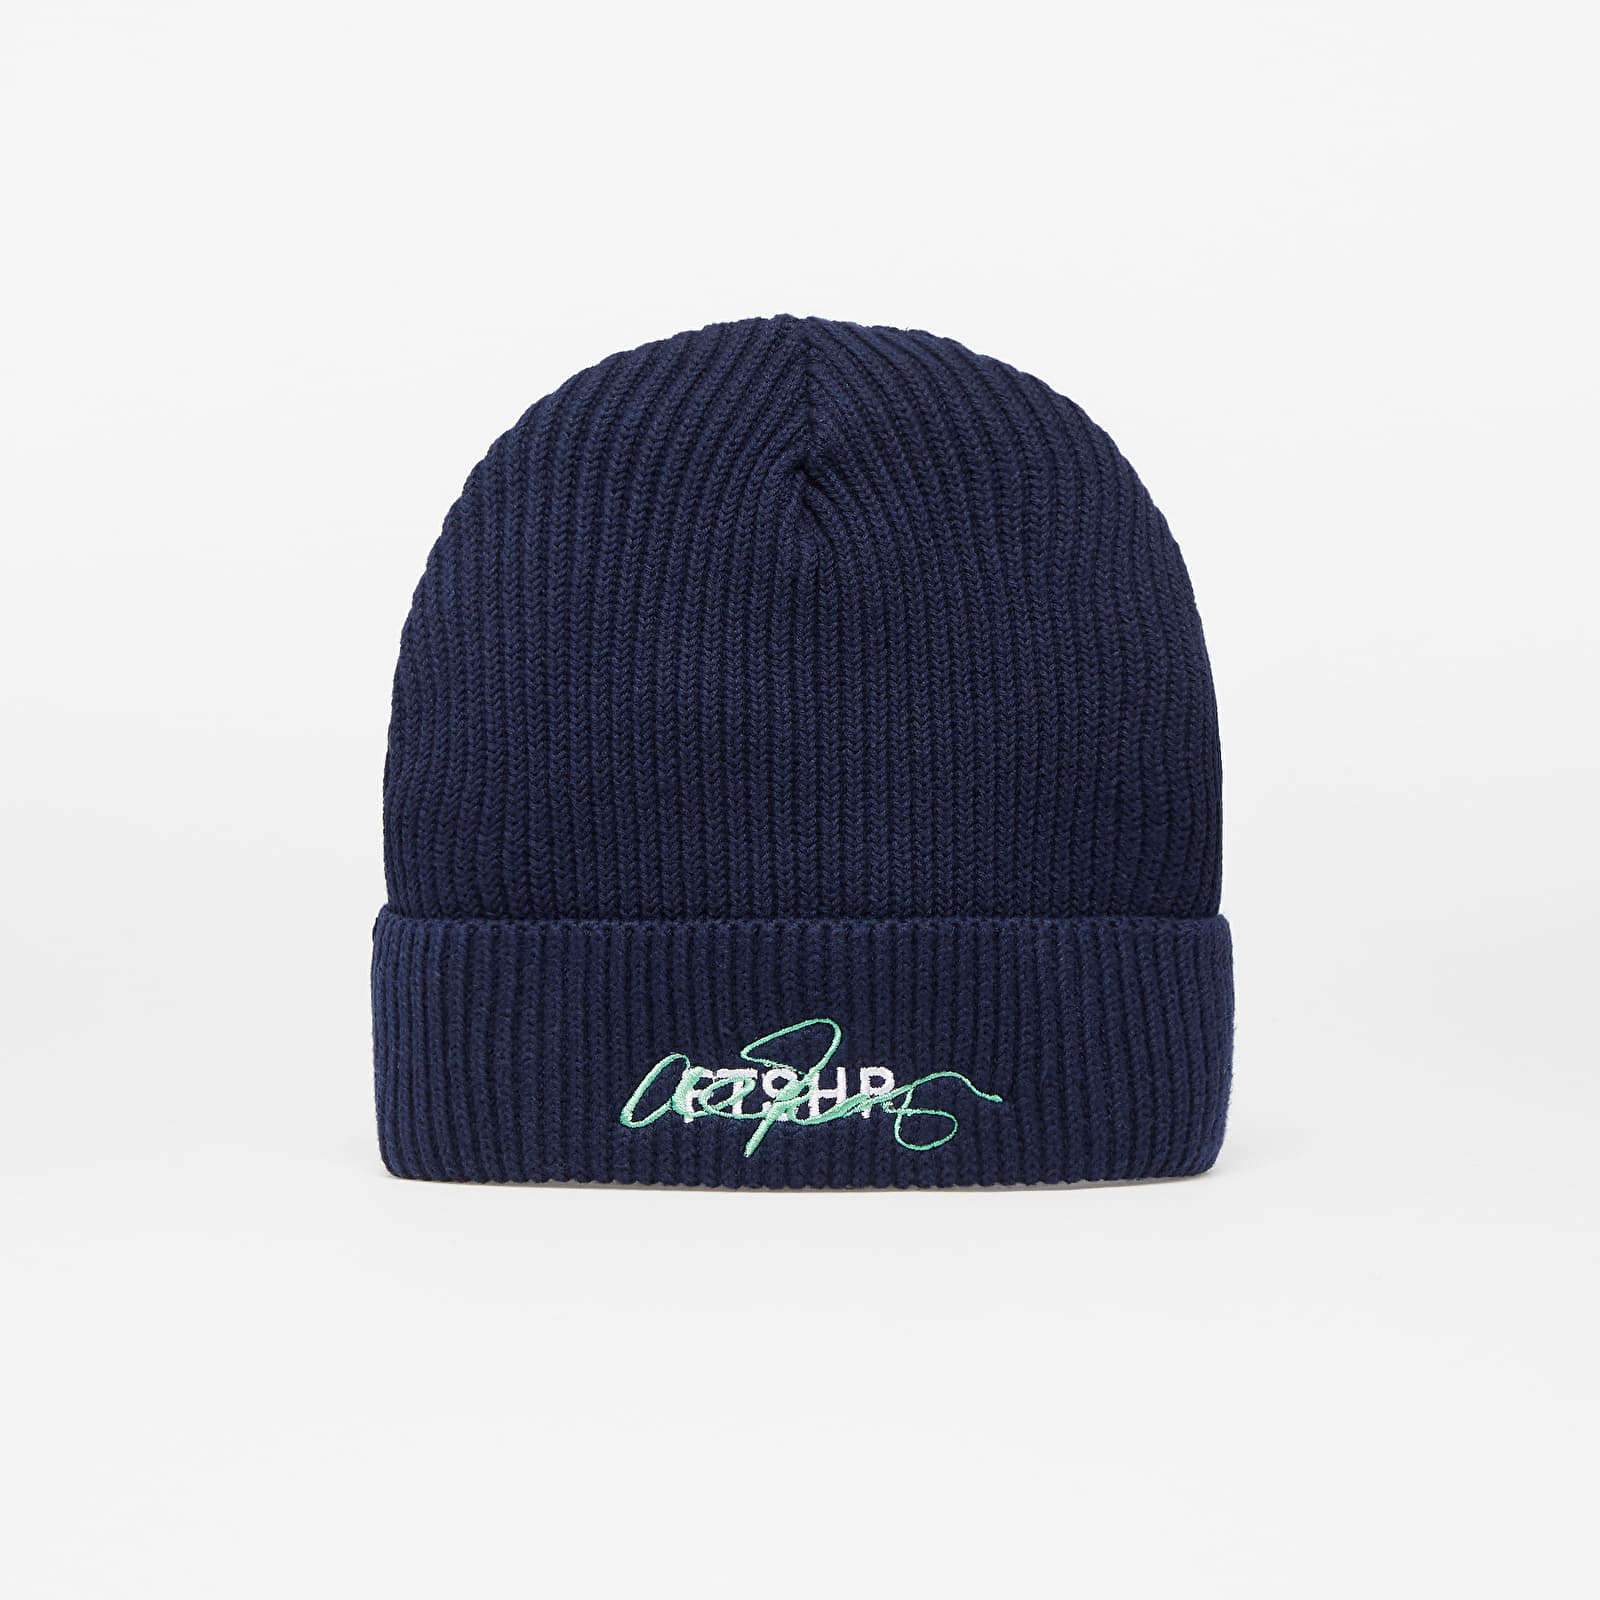 Hats FTSHP Beanie French Navy